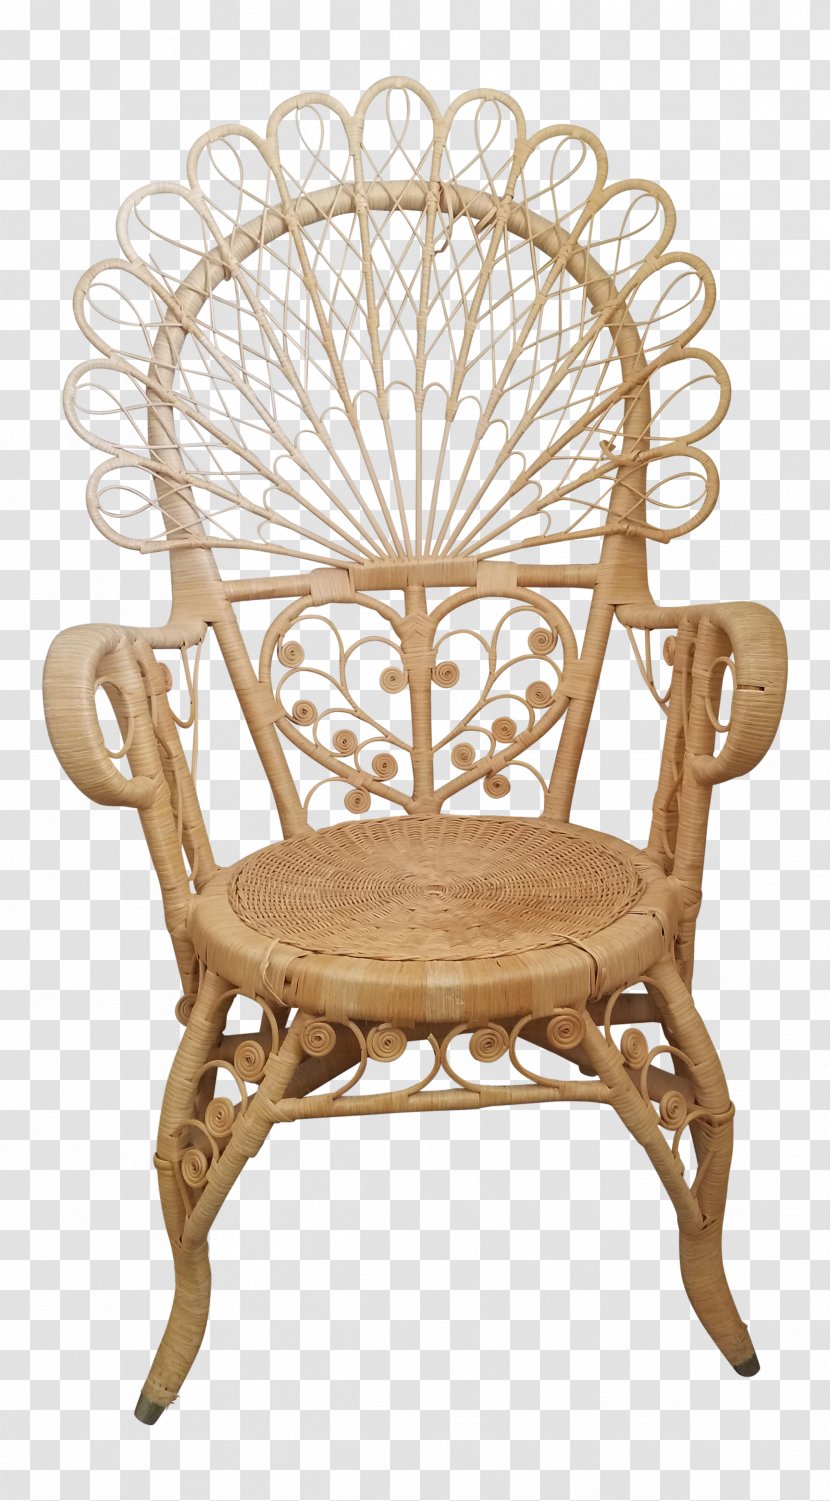 Table Chair - Outdoor Furniture Transparent PNG